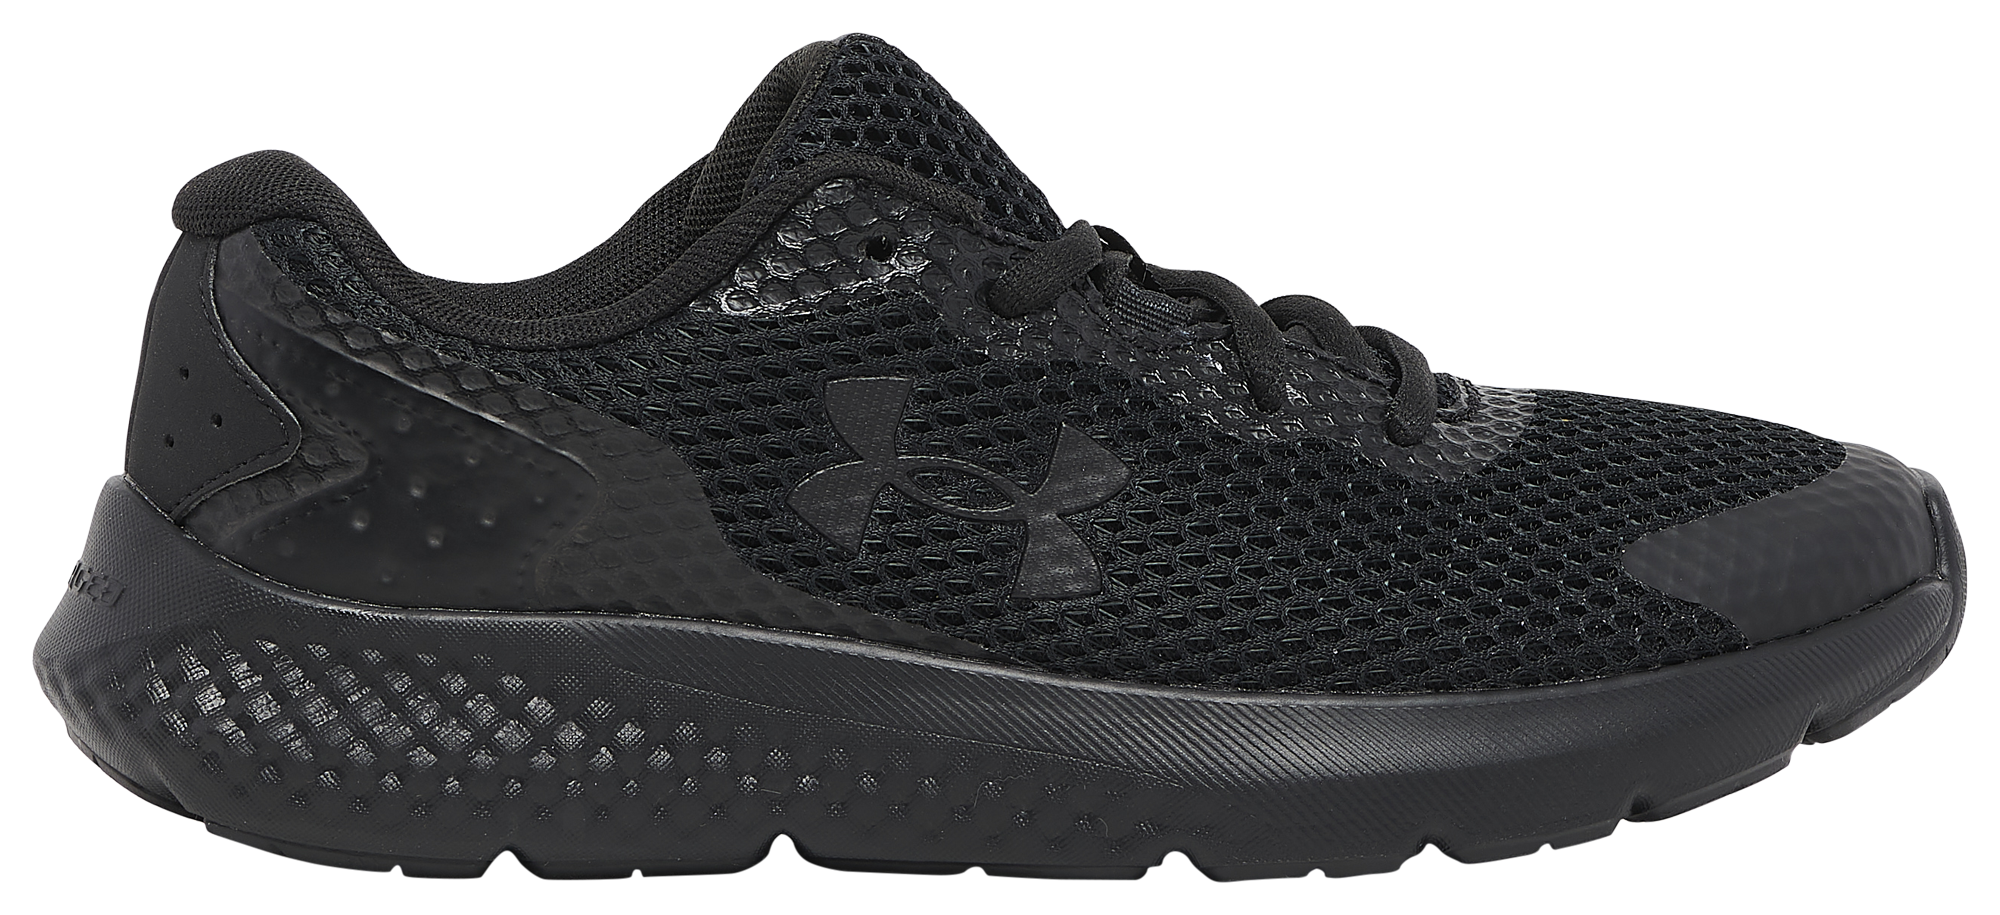 Under Armour Rogue 3